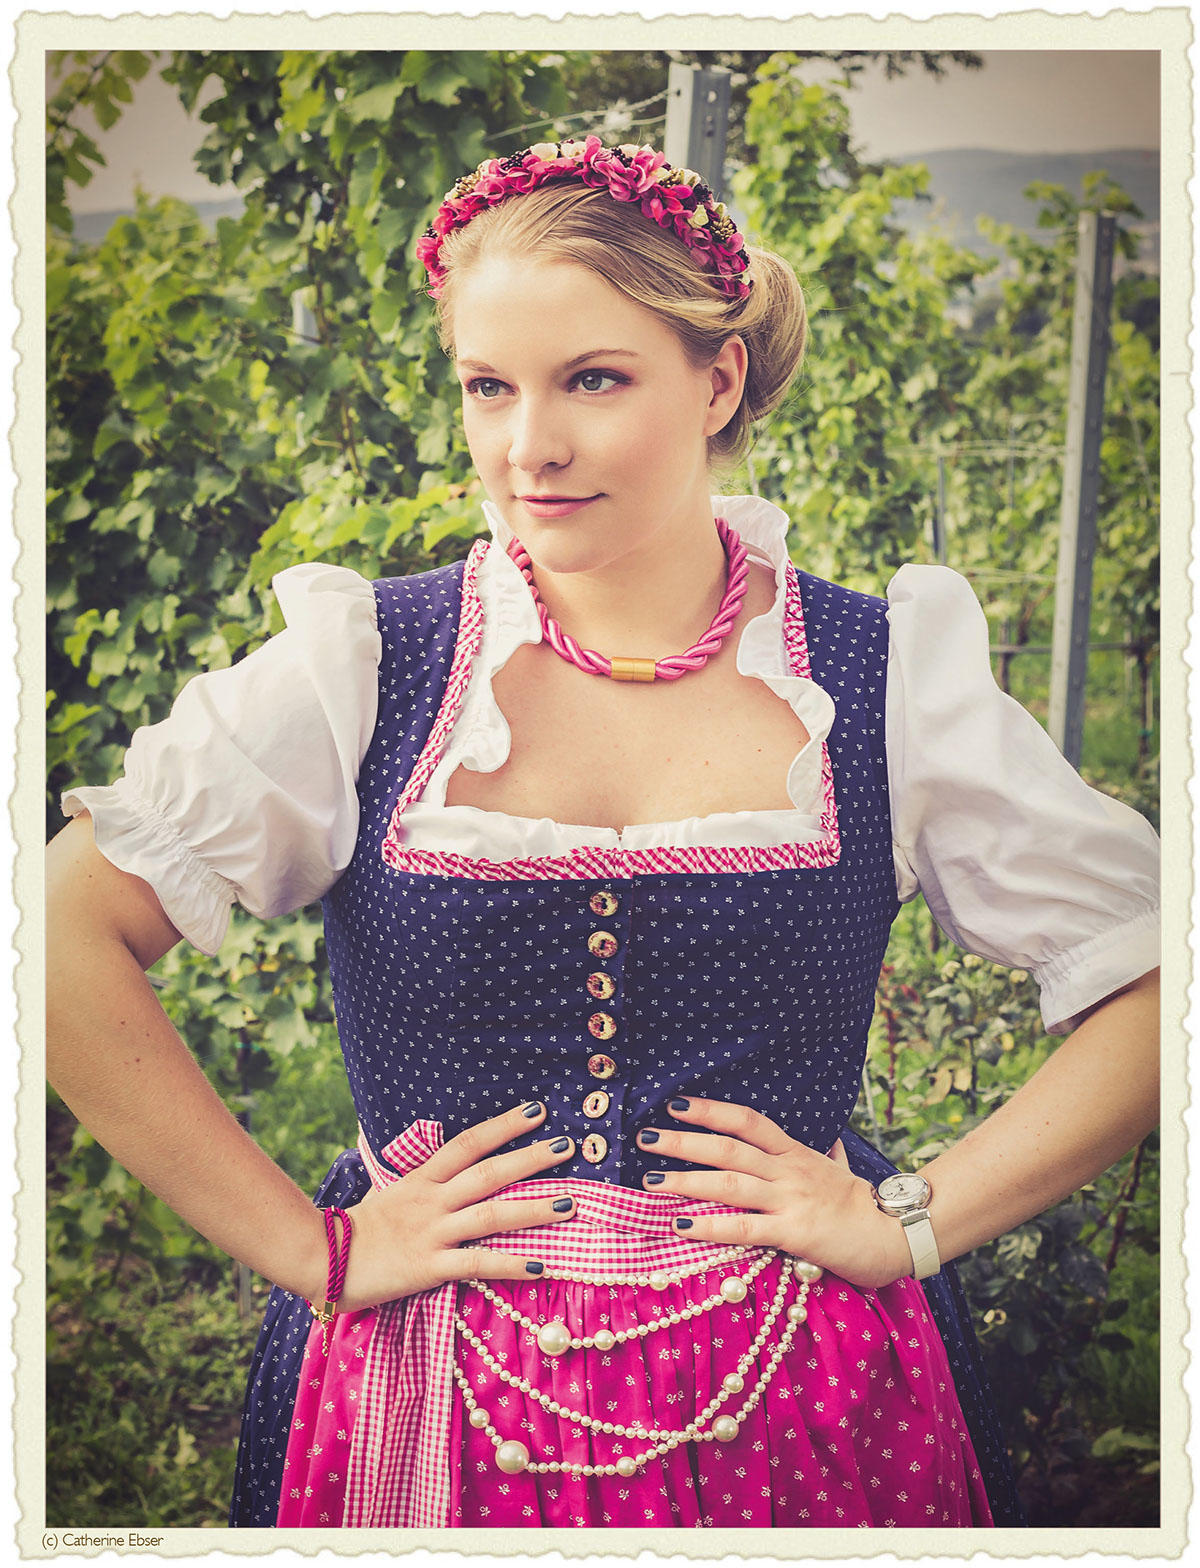 #photography #Fashion #traditional #dirndl #retouch #CreativeDirection